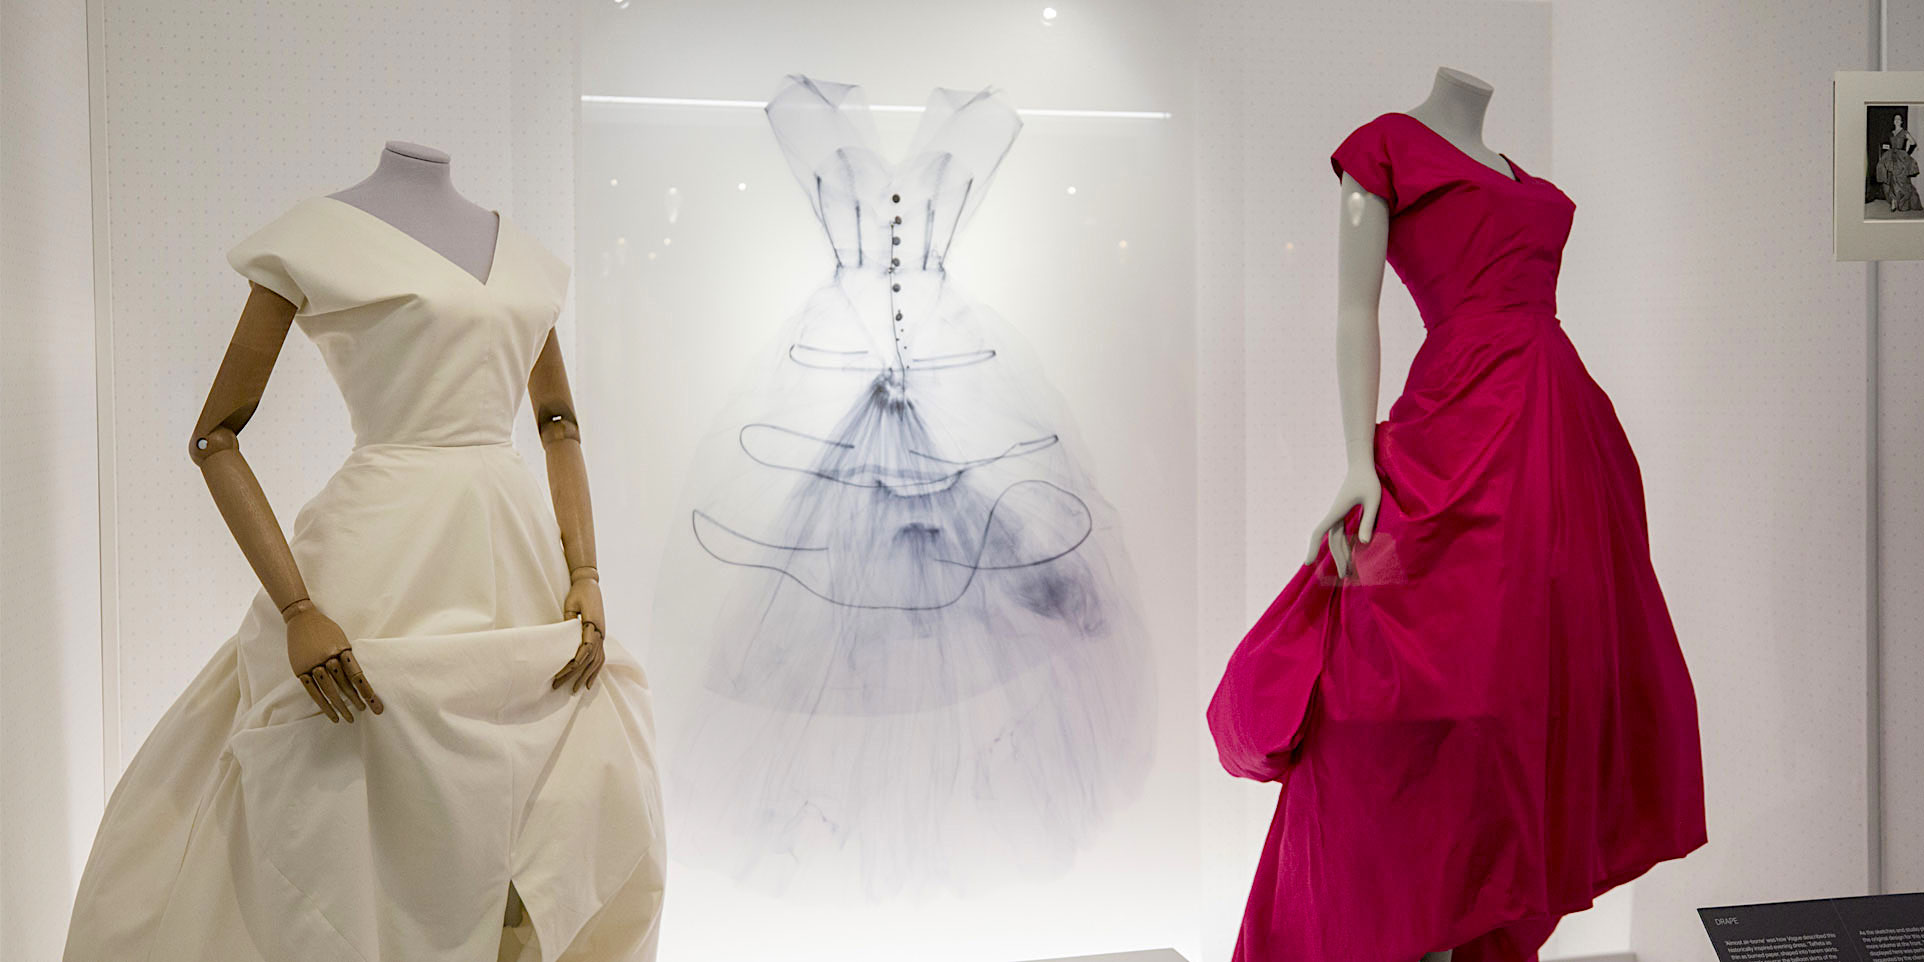 After The Ball Gown: The Haute Couture Secrets of Cristobal Balenciaga